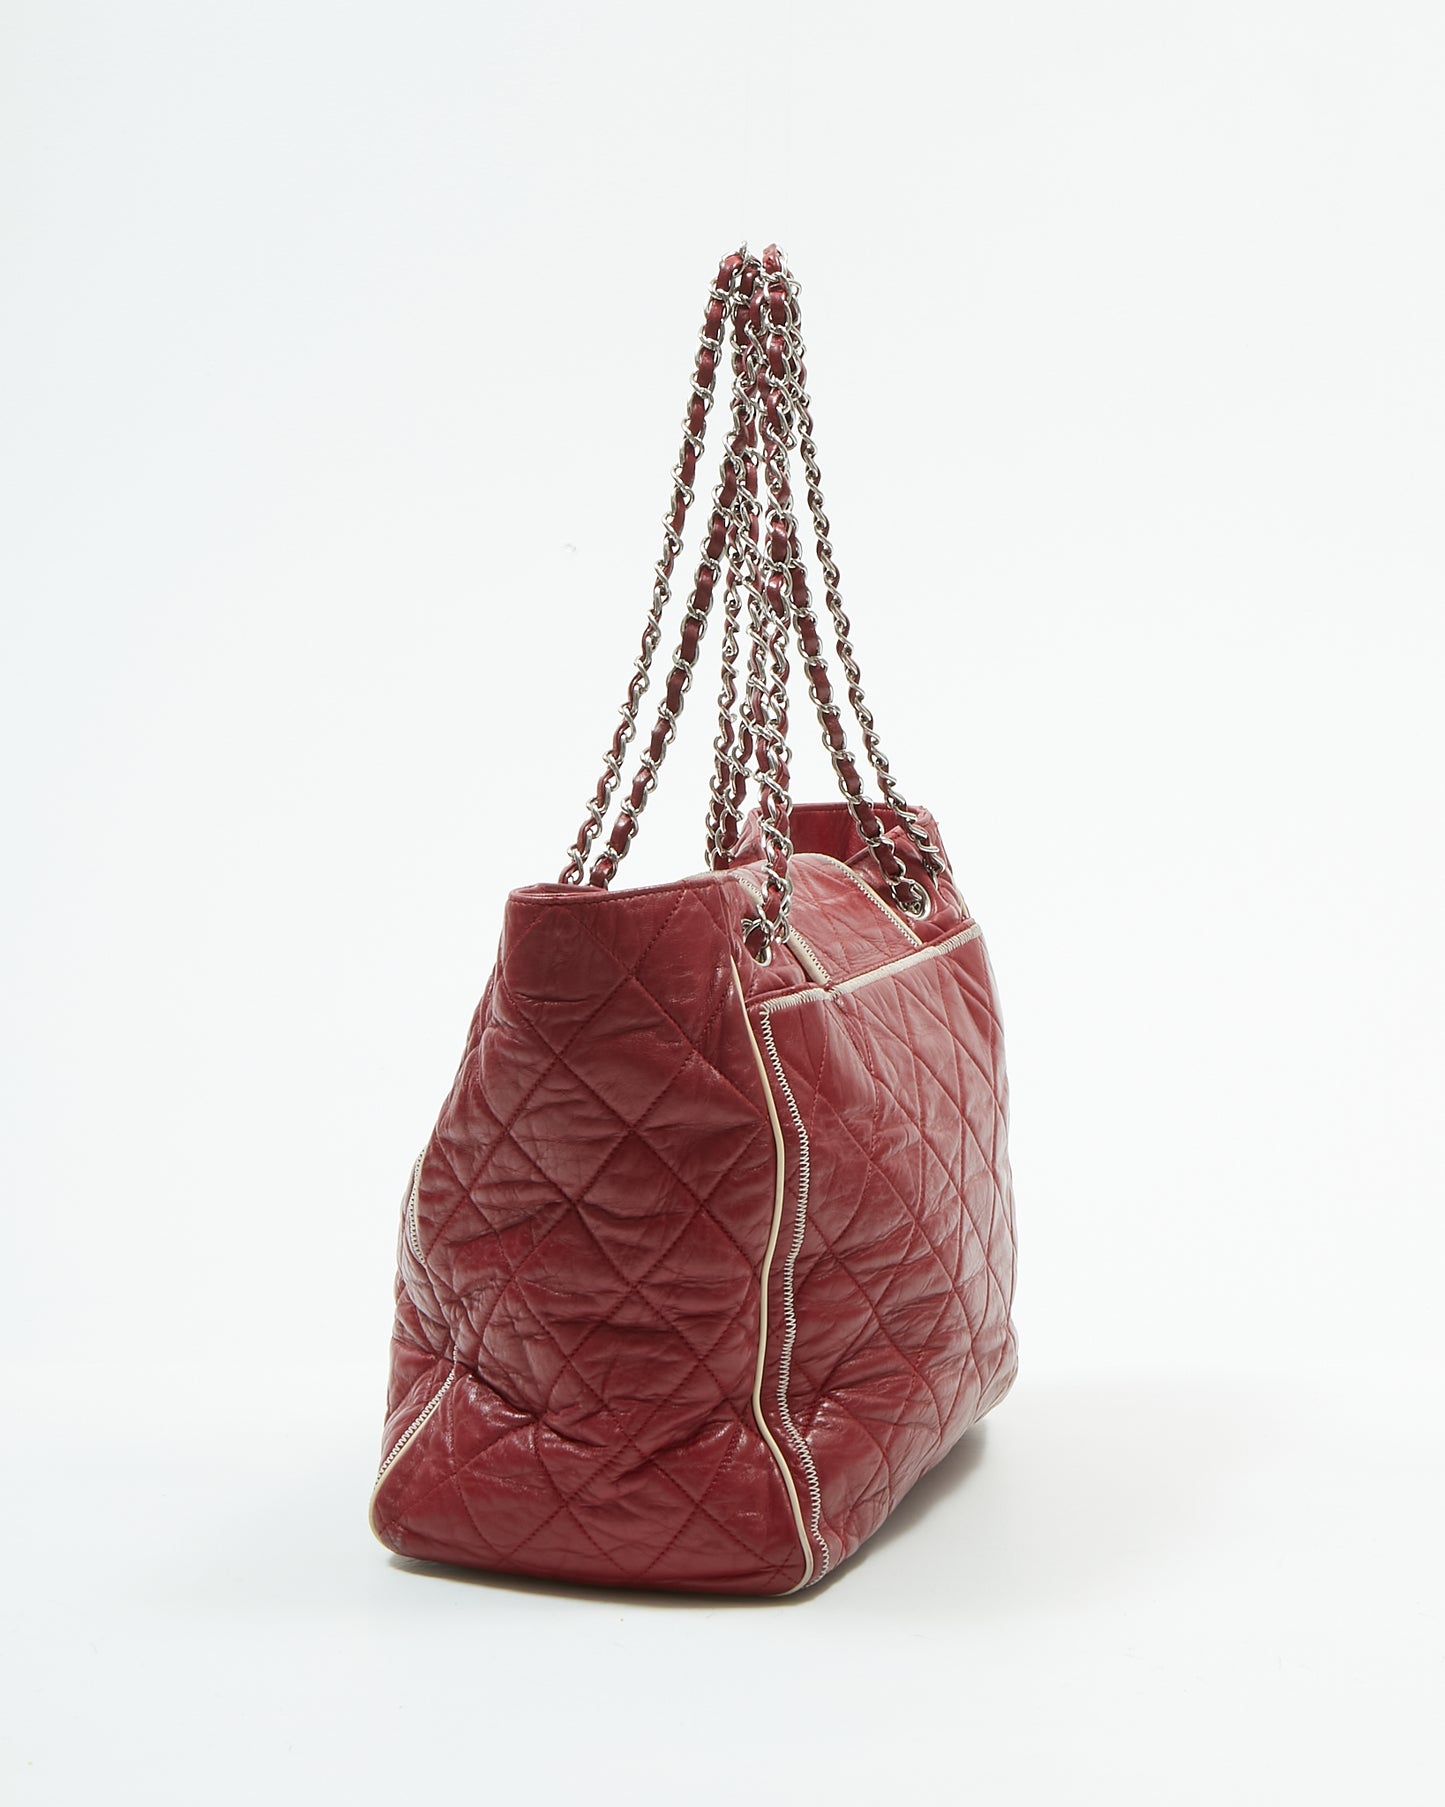 Chanel Red Burgundy Quilted Leather East West Reissue Tote